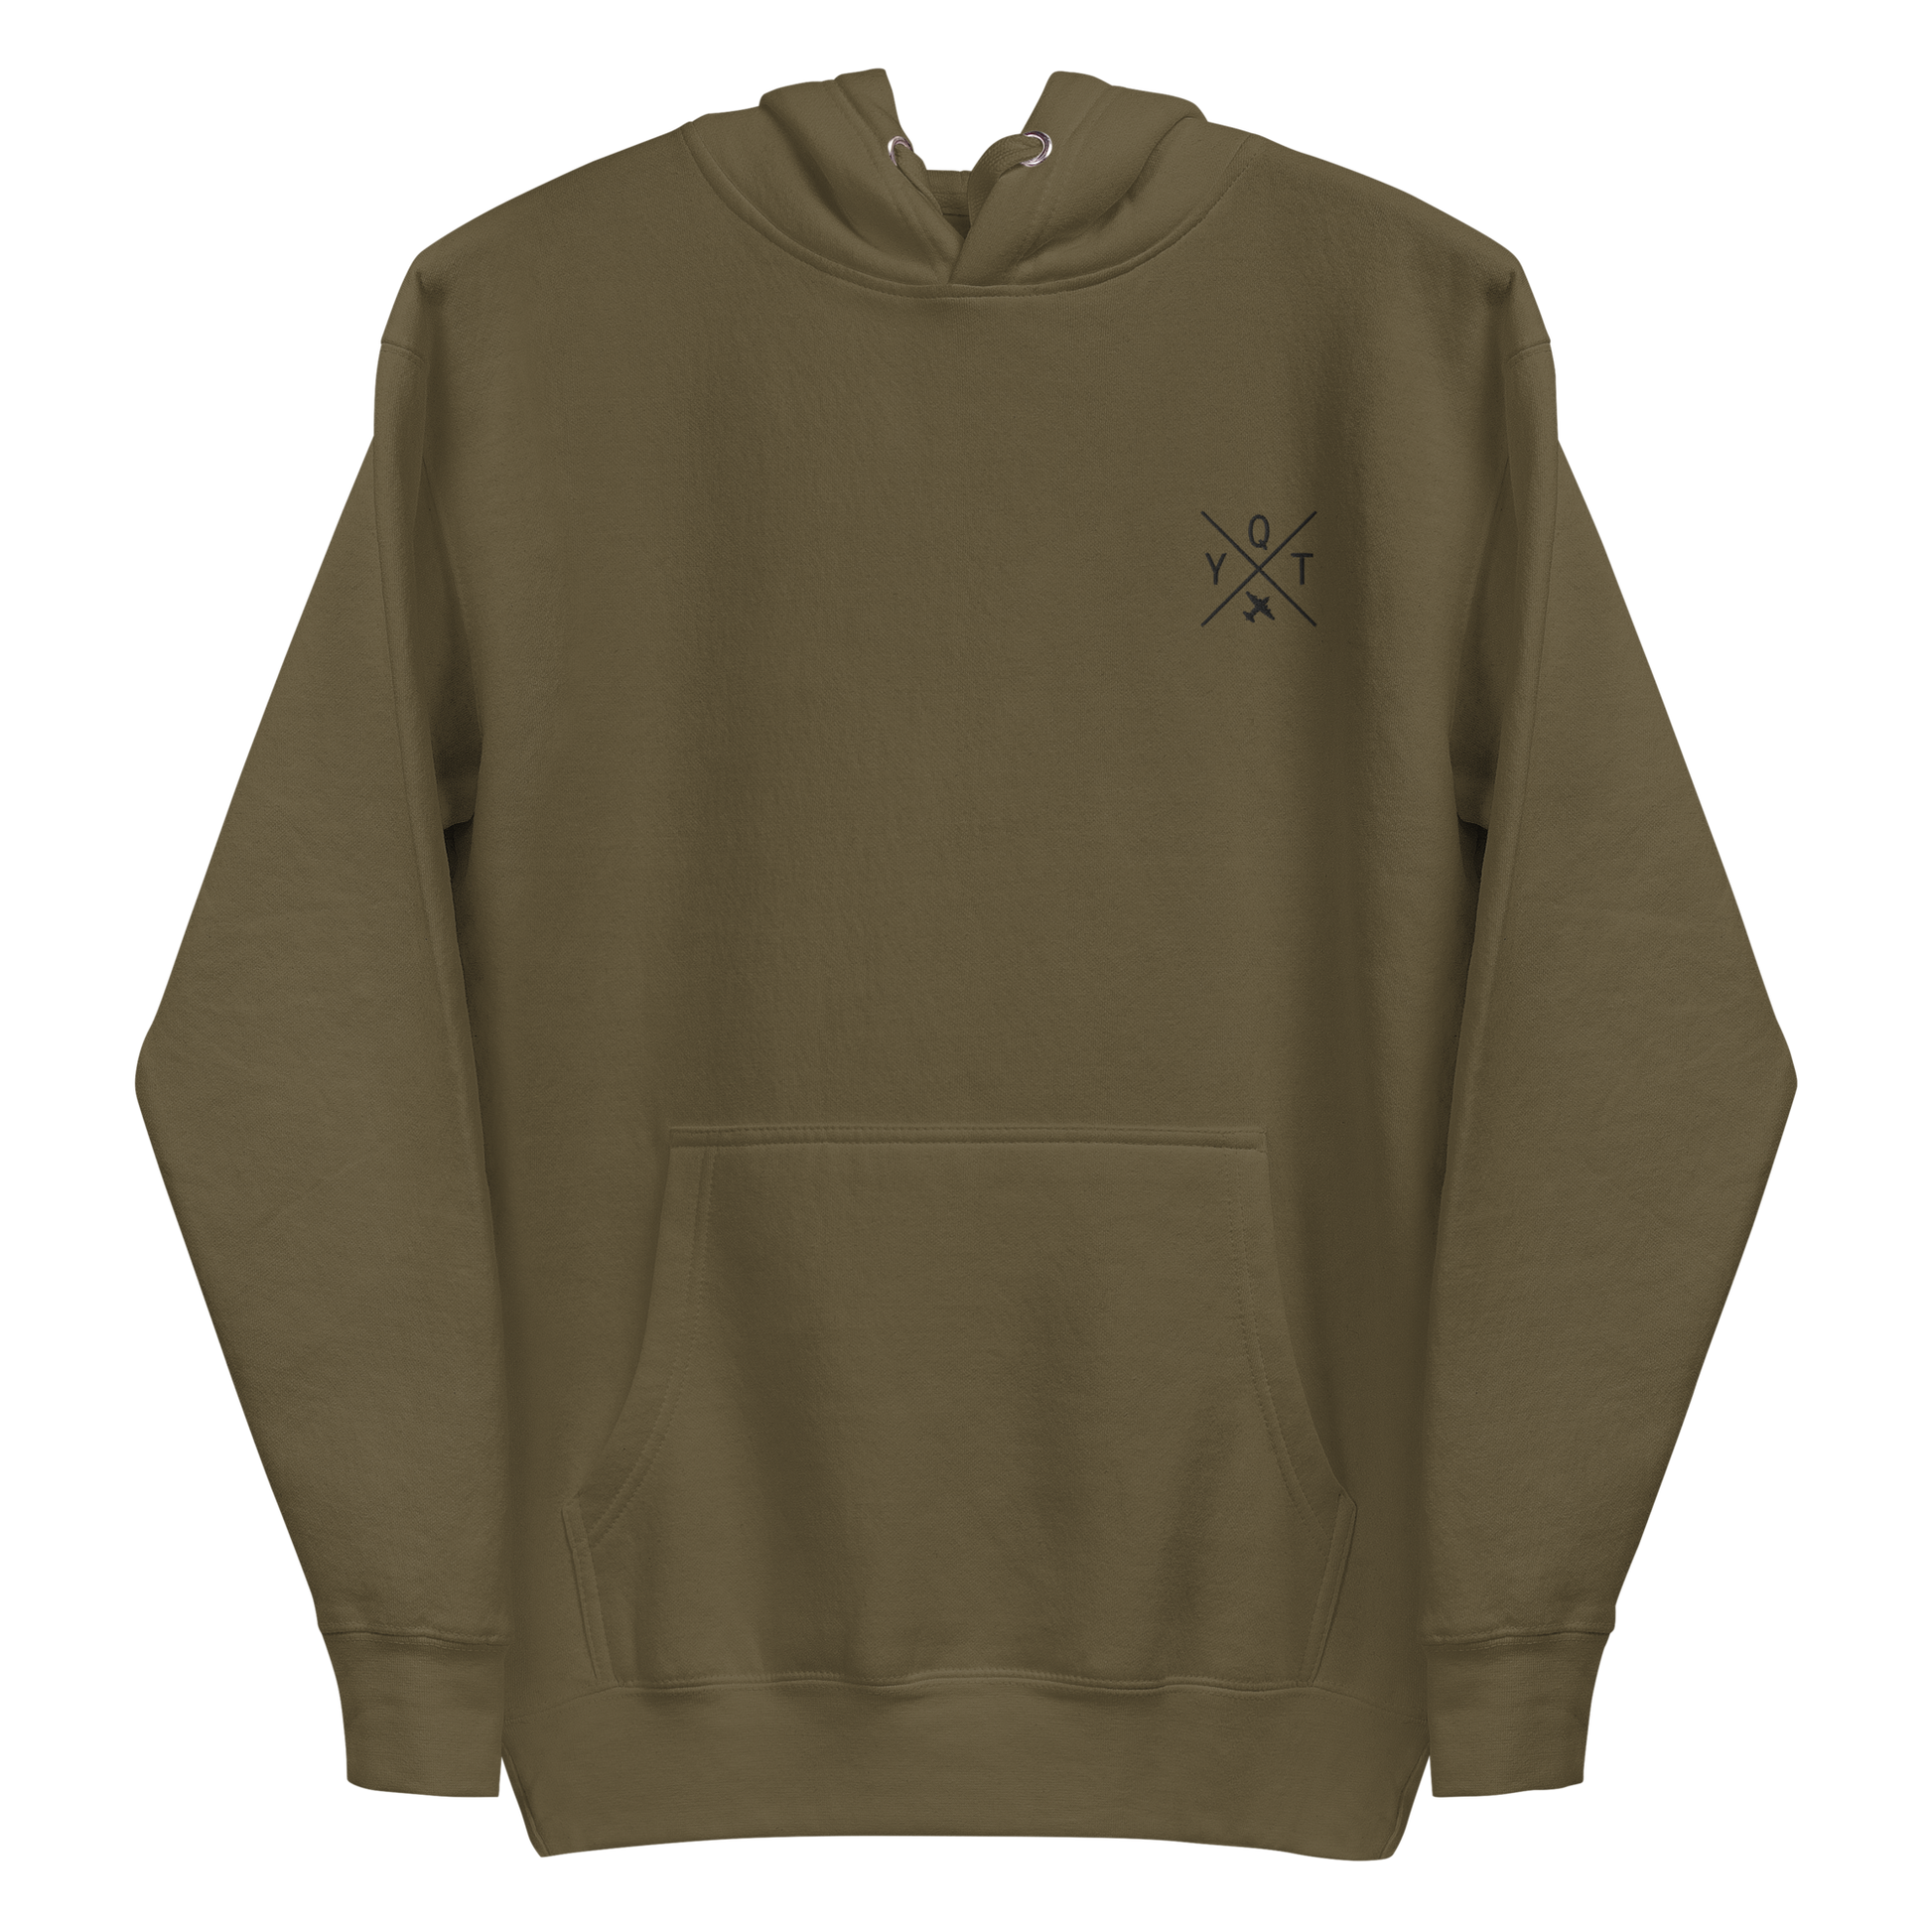 YHM Designs - YQT Thunder Bay Premium Hoodie - Crossed-X Design with Airport Code and Vintage Propliner - Black Embroidery - Image 06